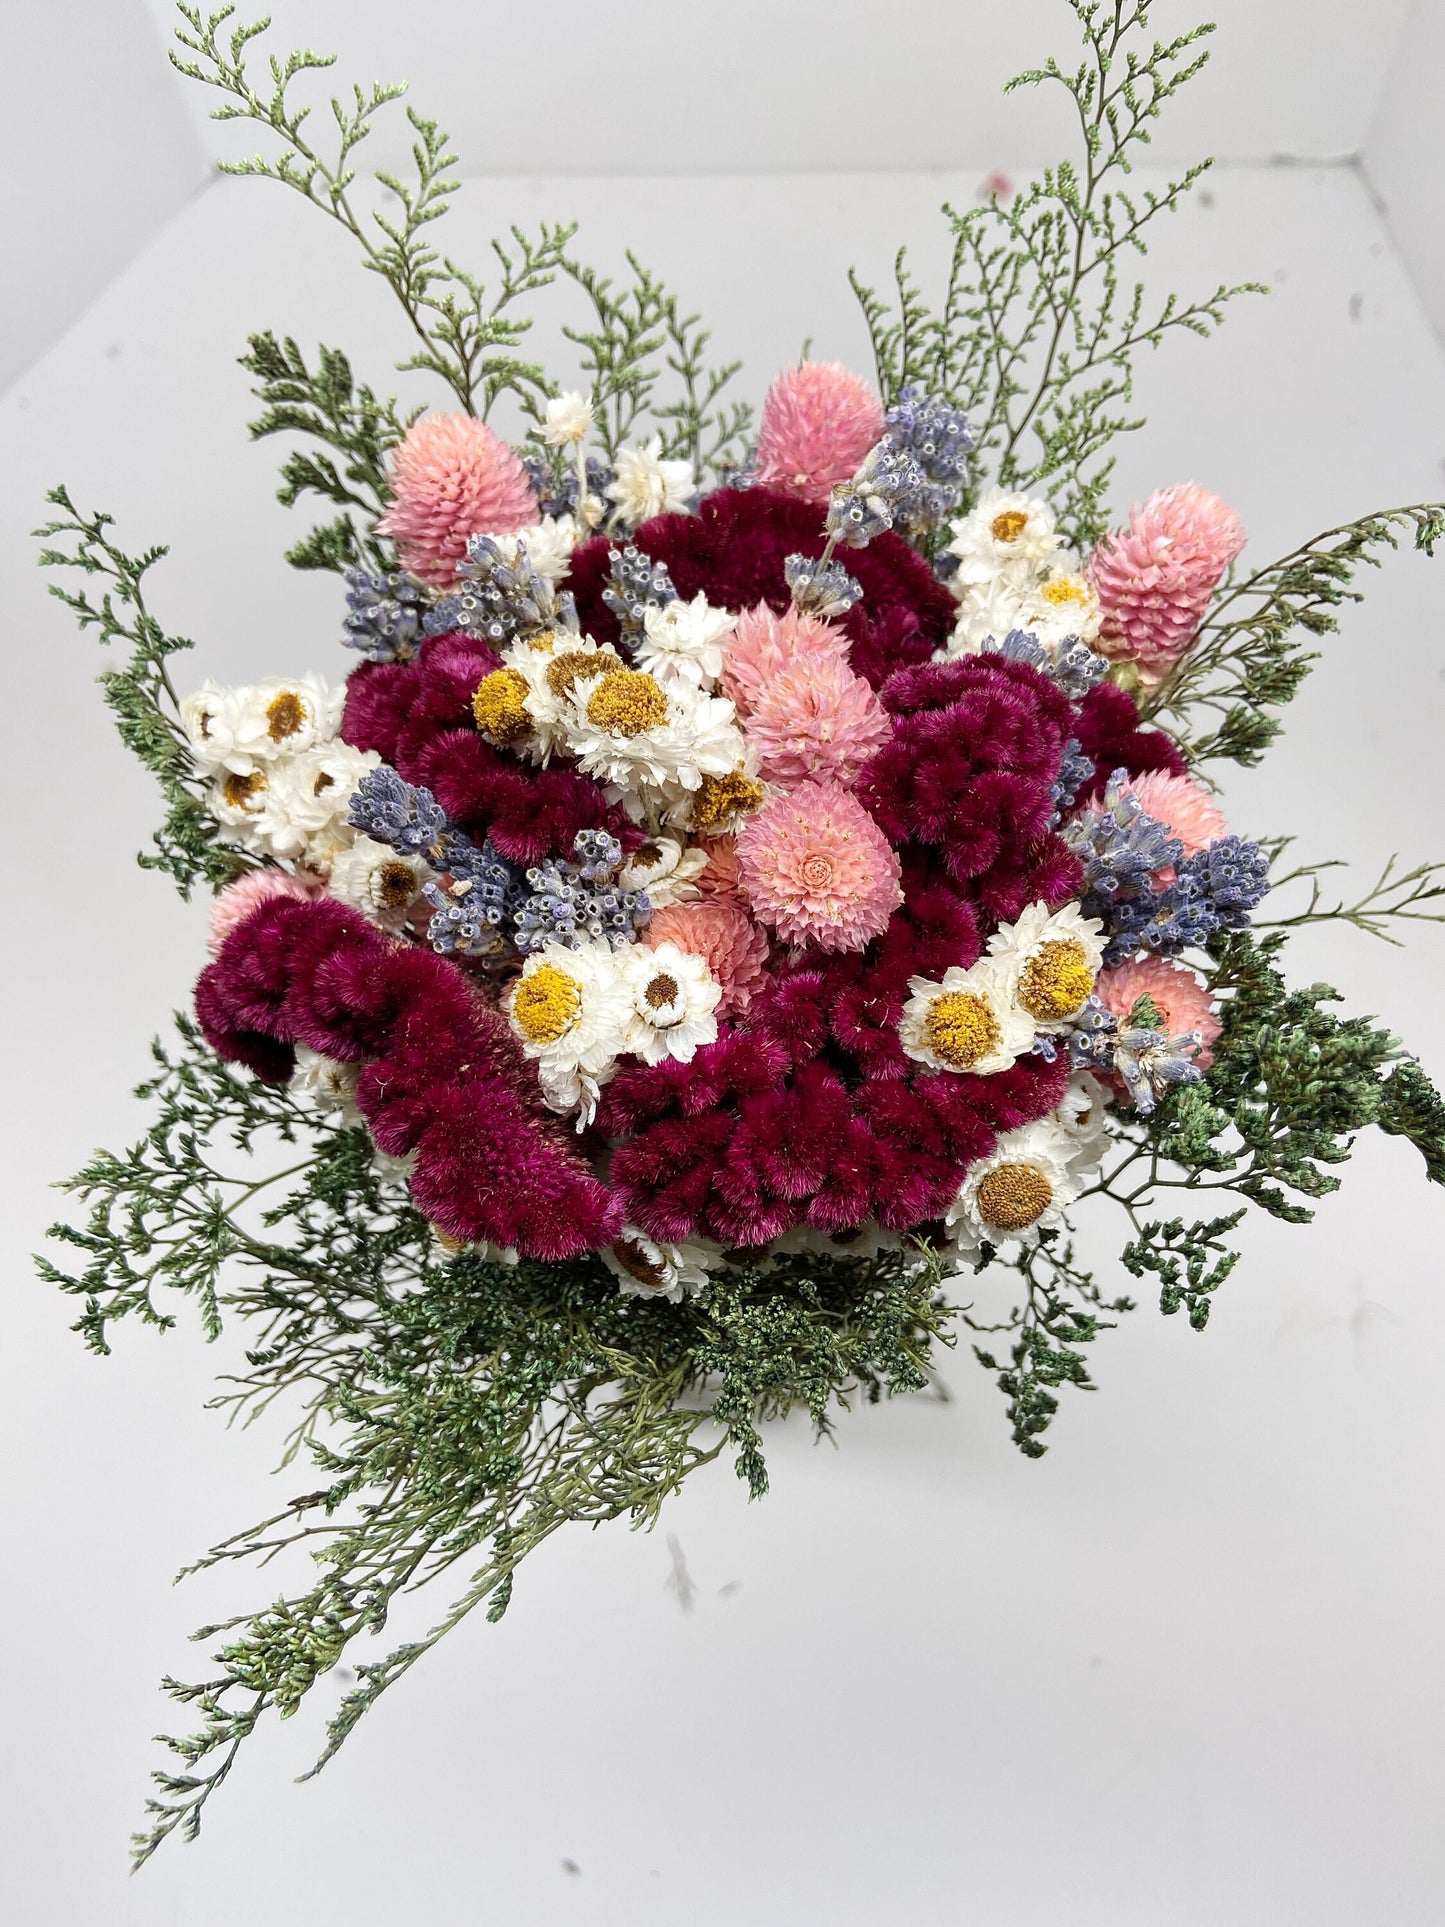 Spring Collection, Bouquet, Natural Flowers, Dried, Bridal, Wedding, Floral, Colorful, Bridesmaid, Pink, Lavender, Globe Amaranth, Caspia